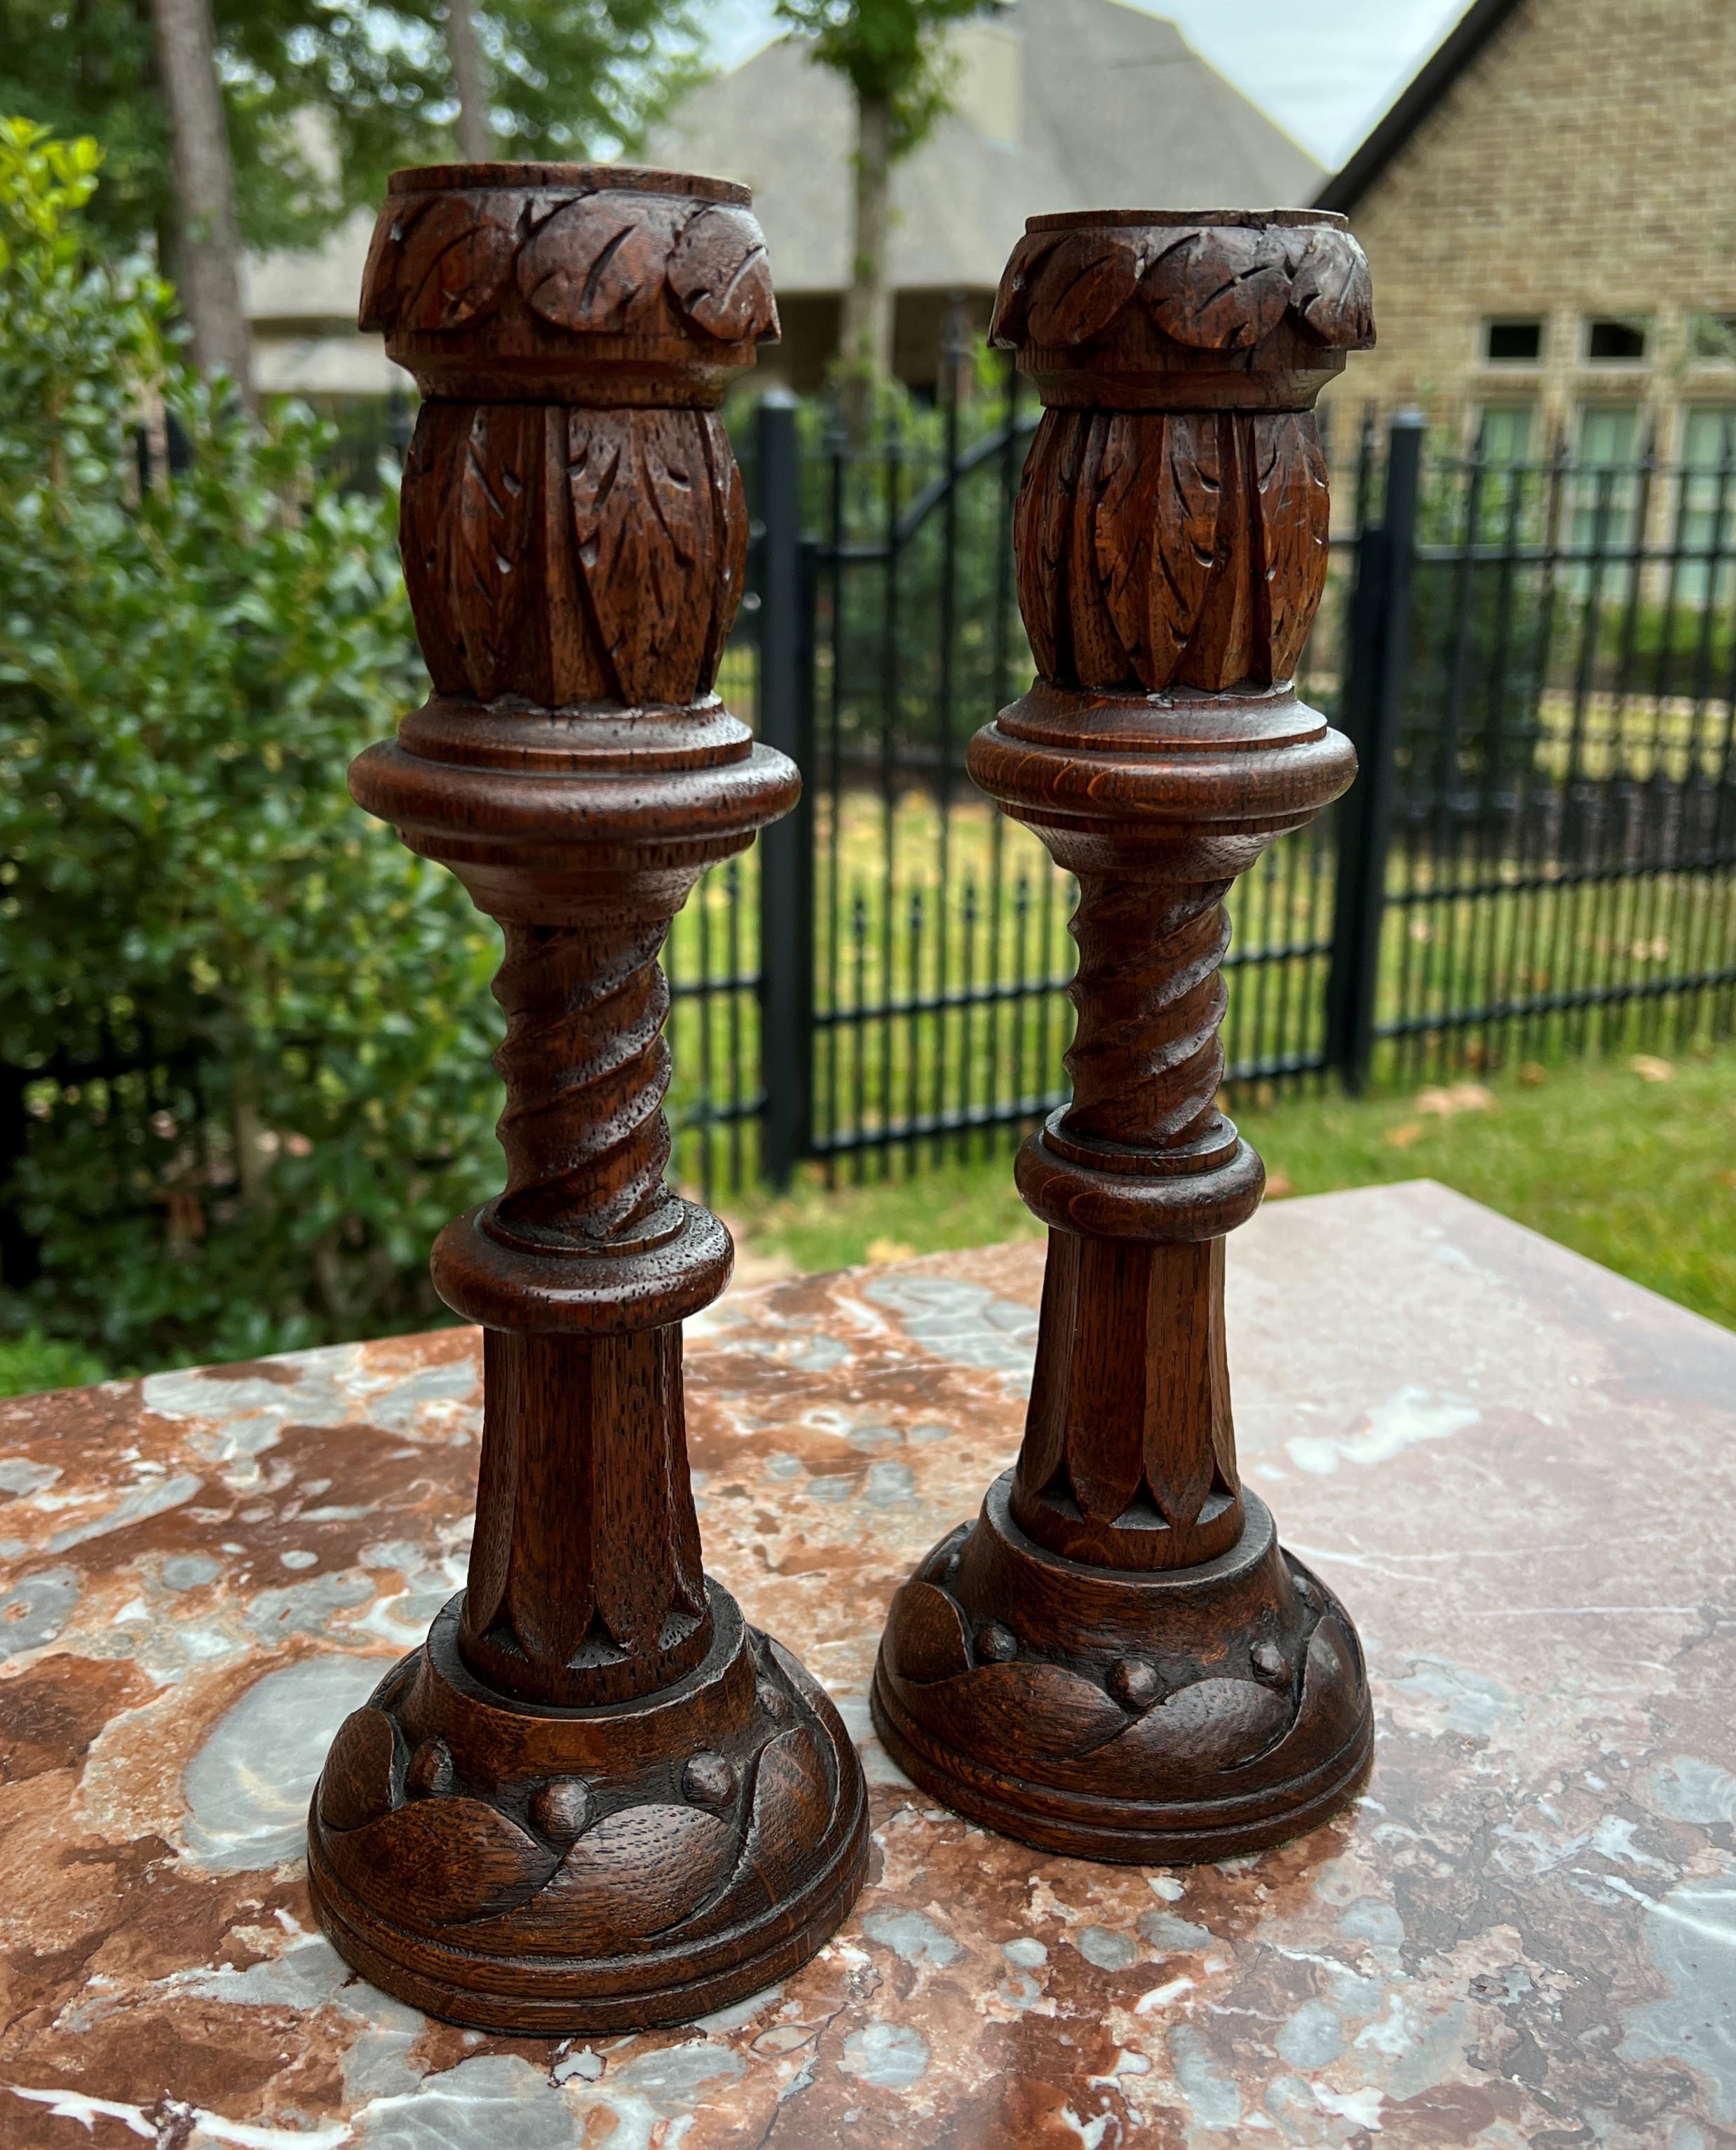 Charming pair of antique English oak gothic revival candlesticks candle holders with brass inset cups c. 1920s

Sturdy and stable oak

Measures: 11.25